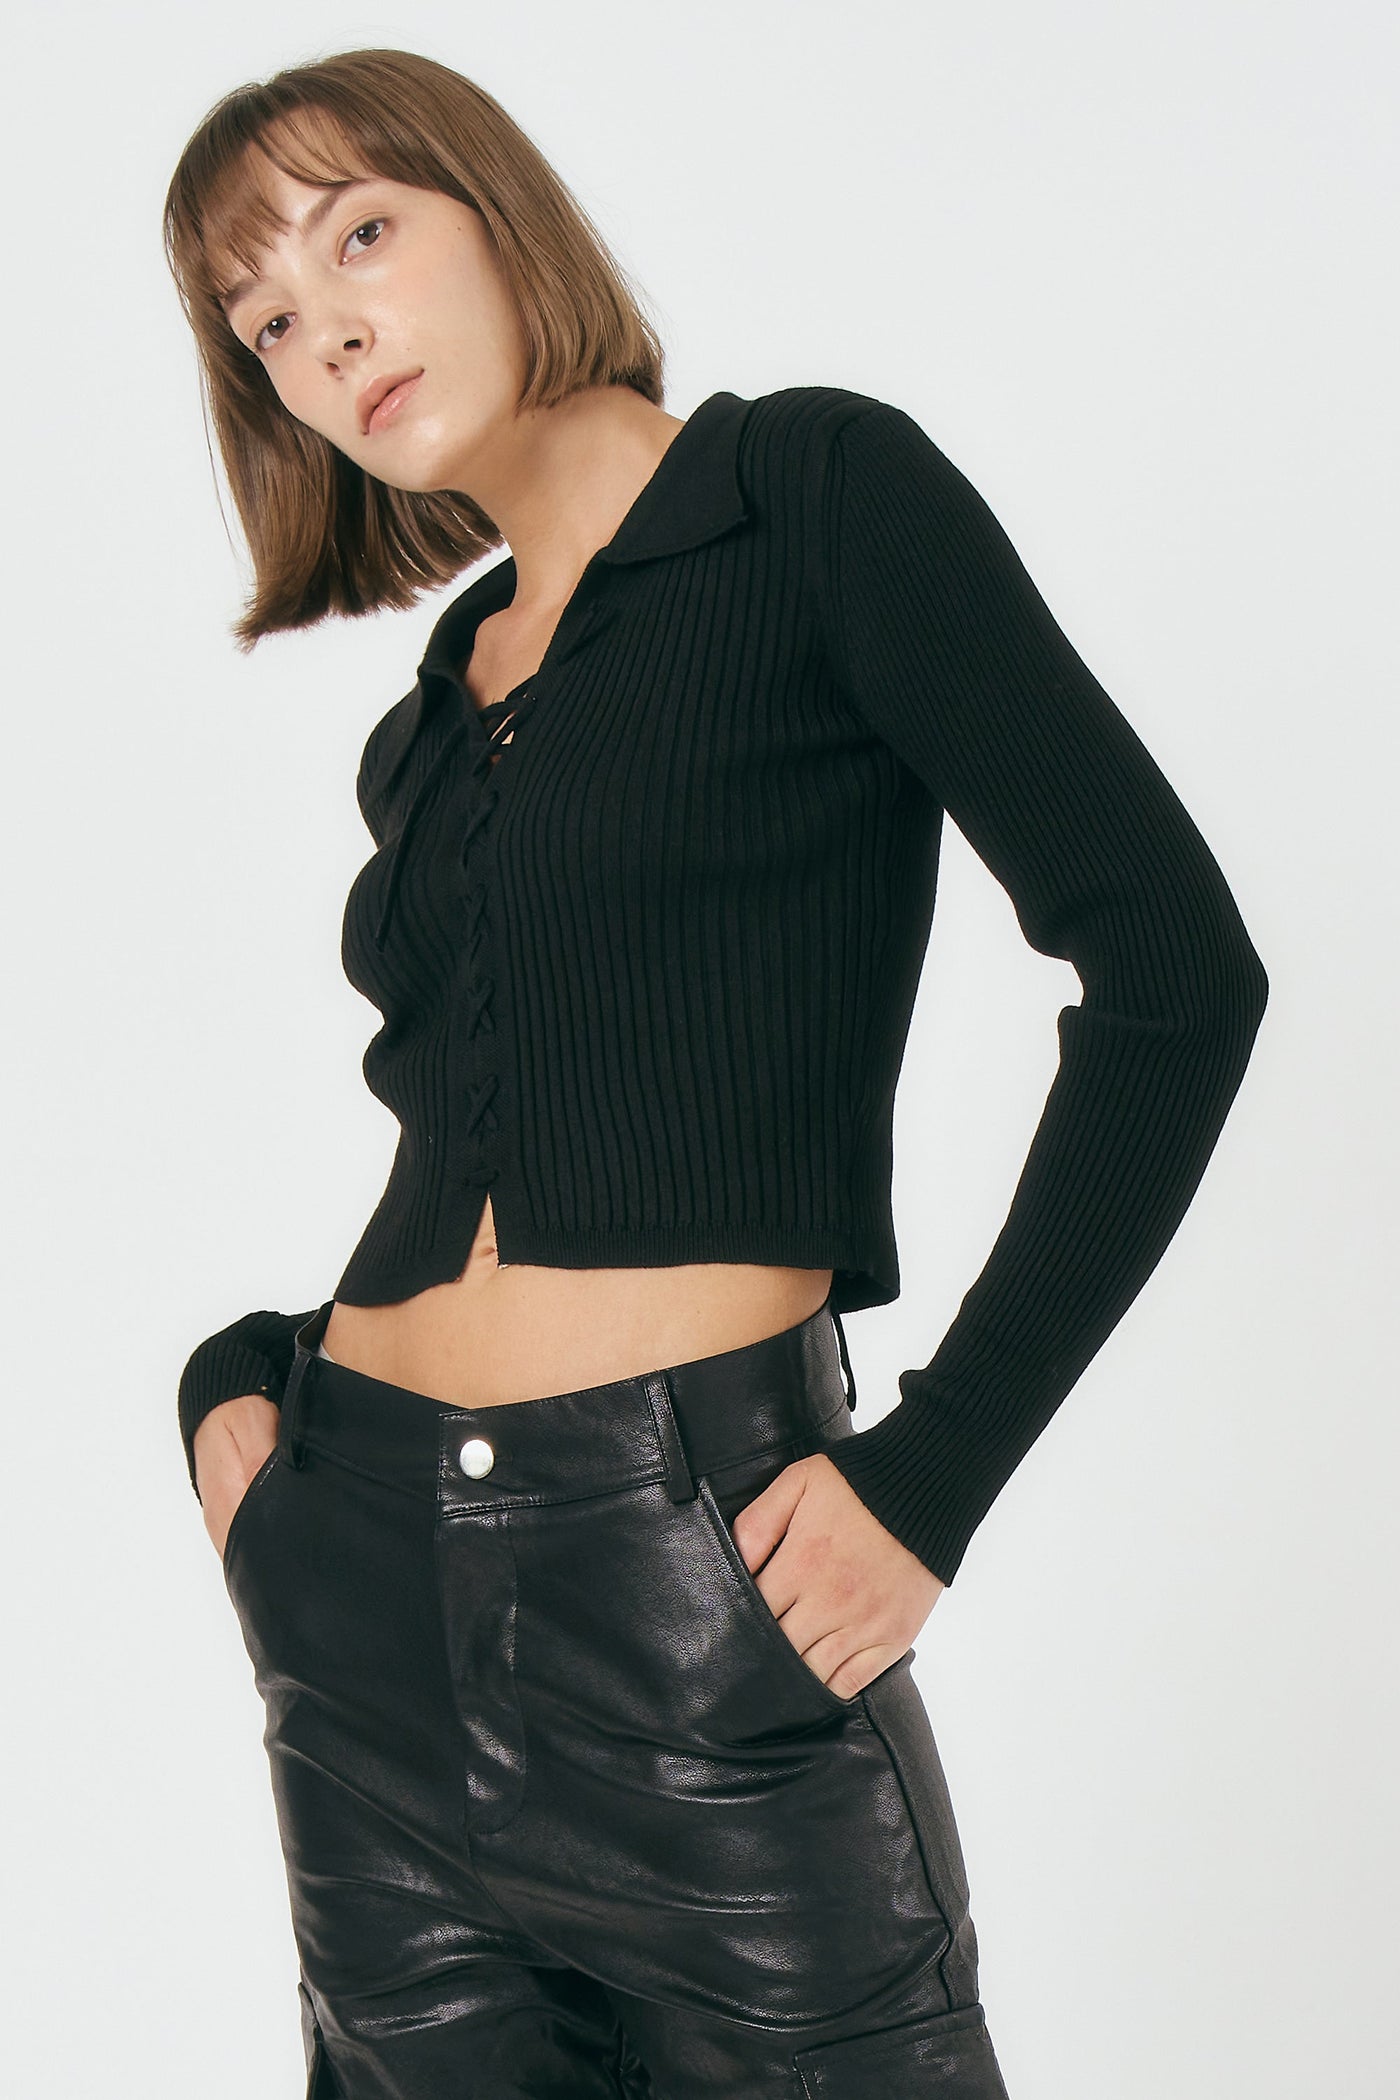 storets.com Adella Lace Up Knitted Top